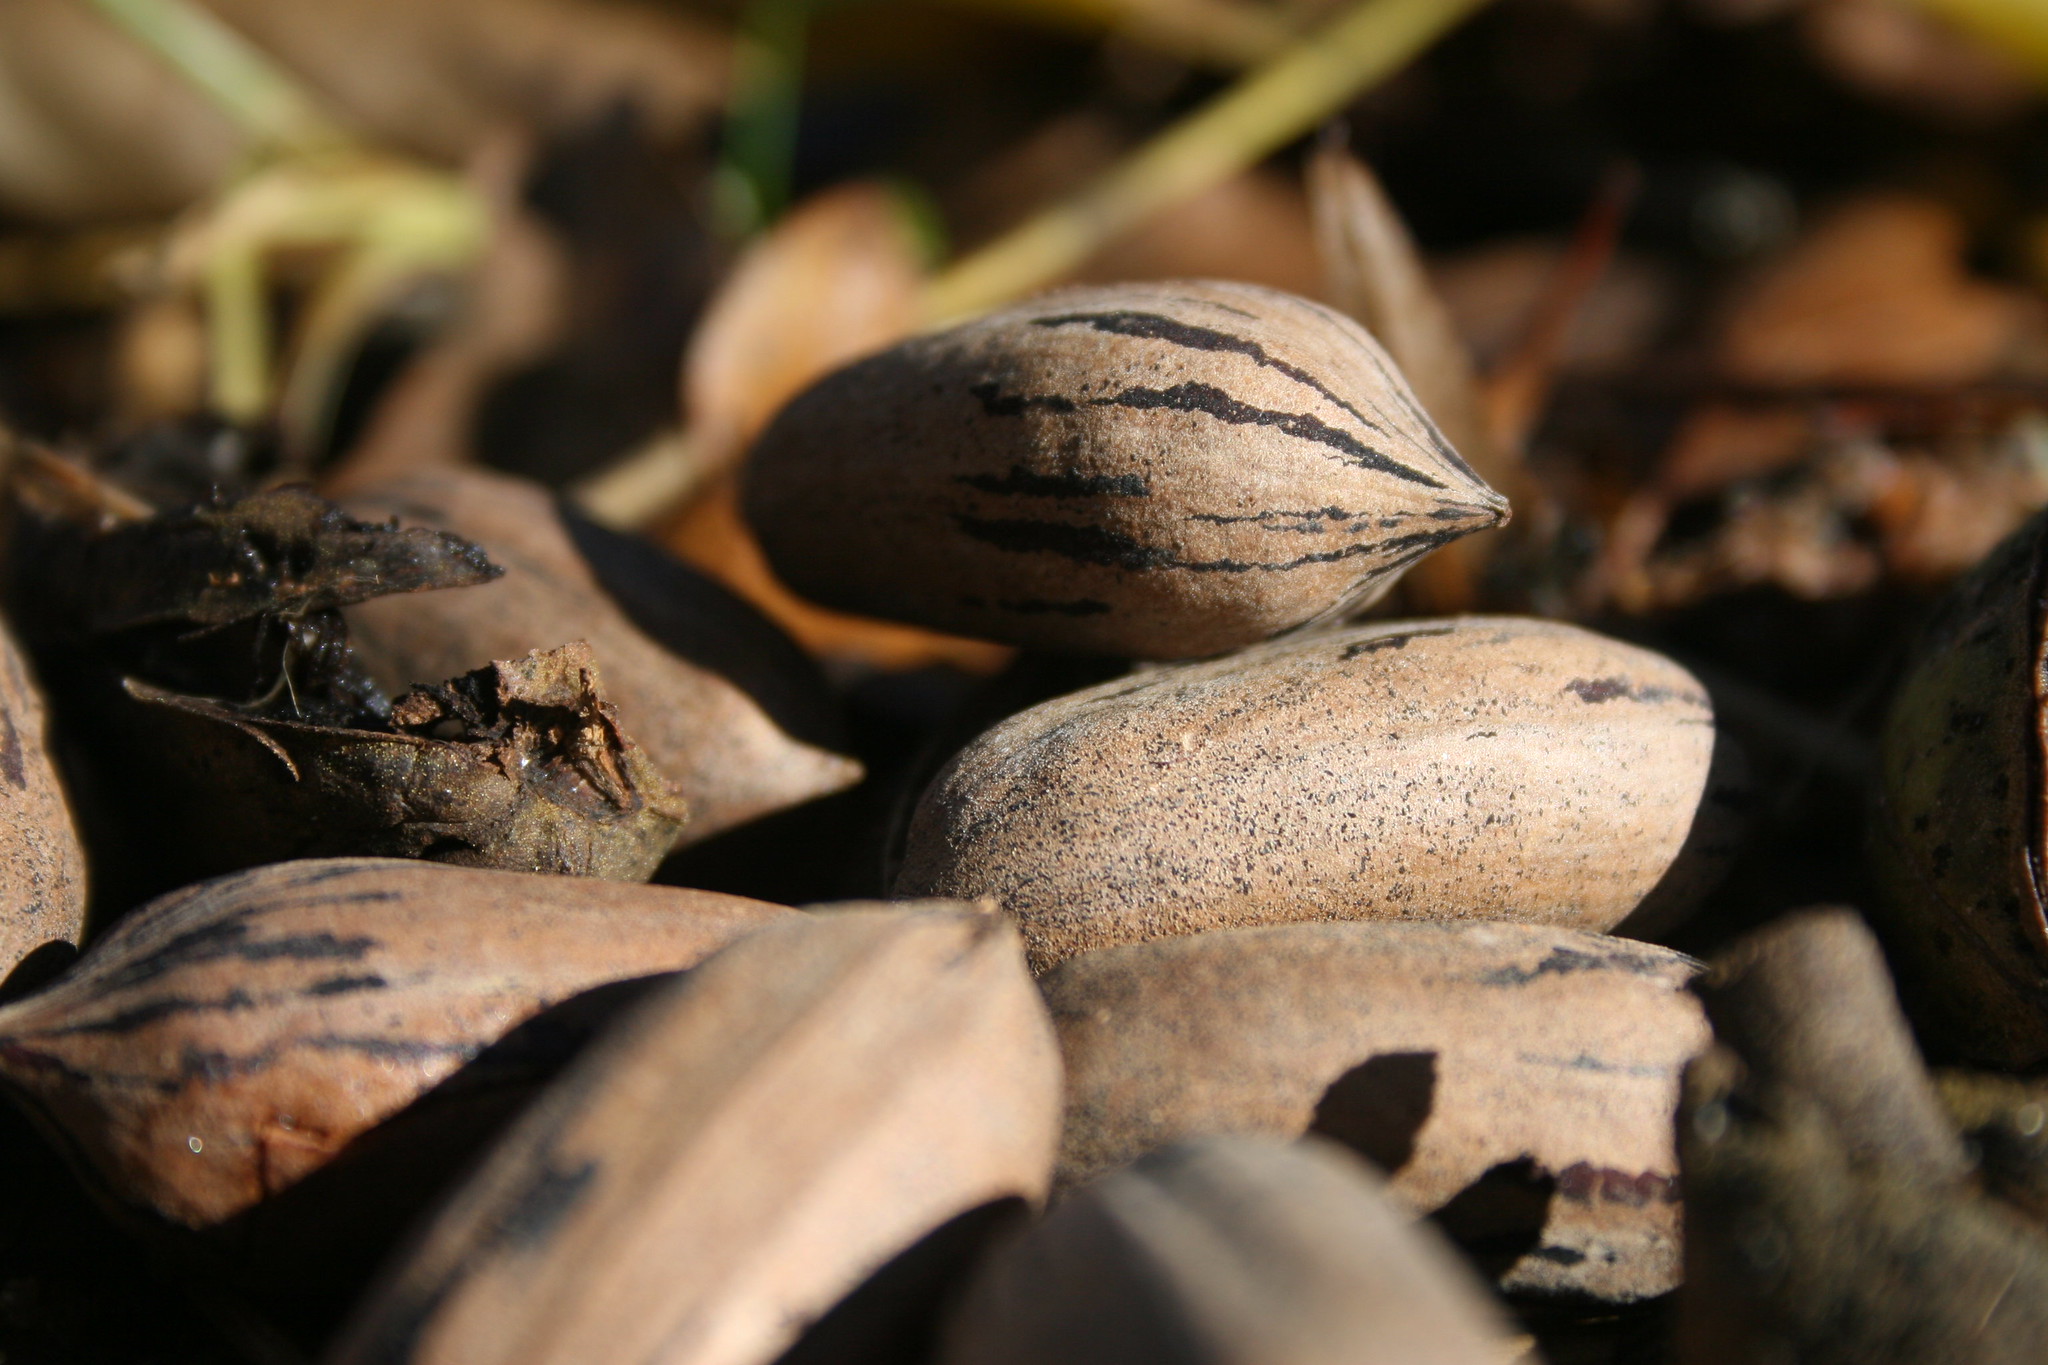 Georgia continues to be the top pecan-producing state in the U.S.